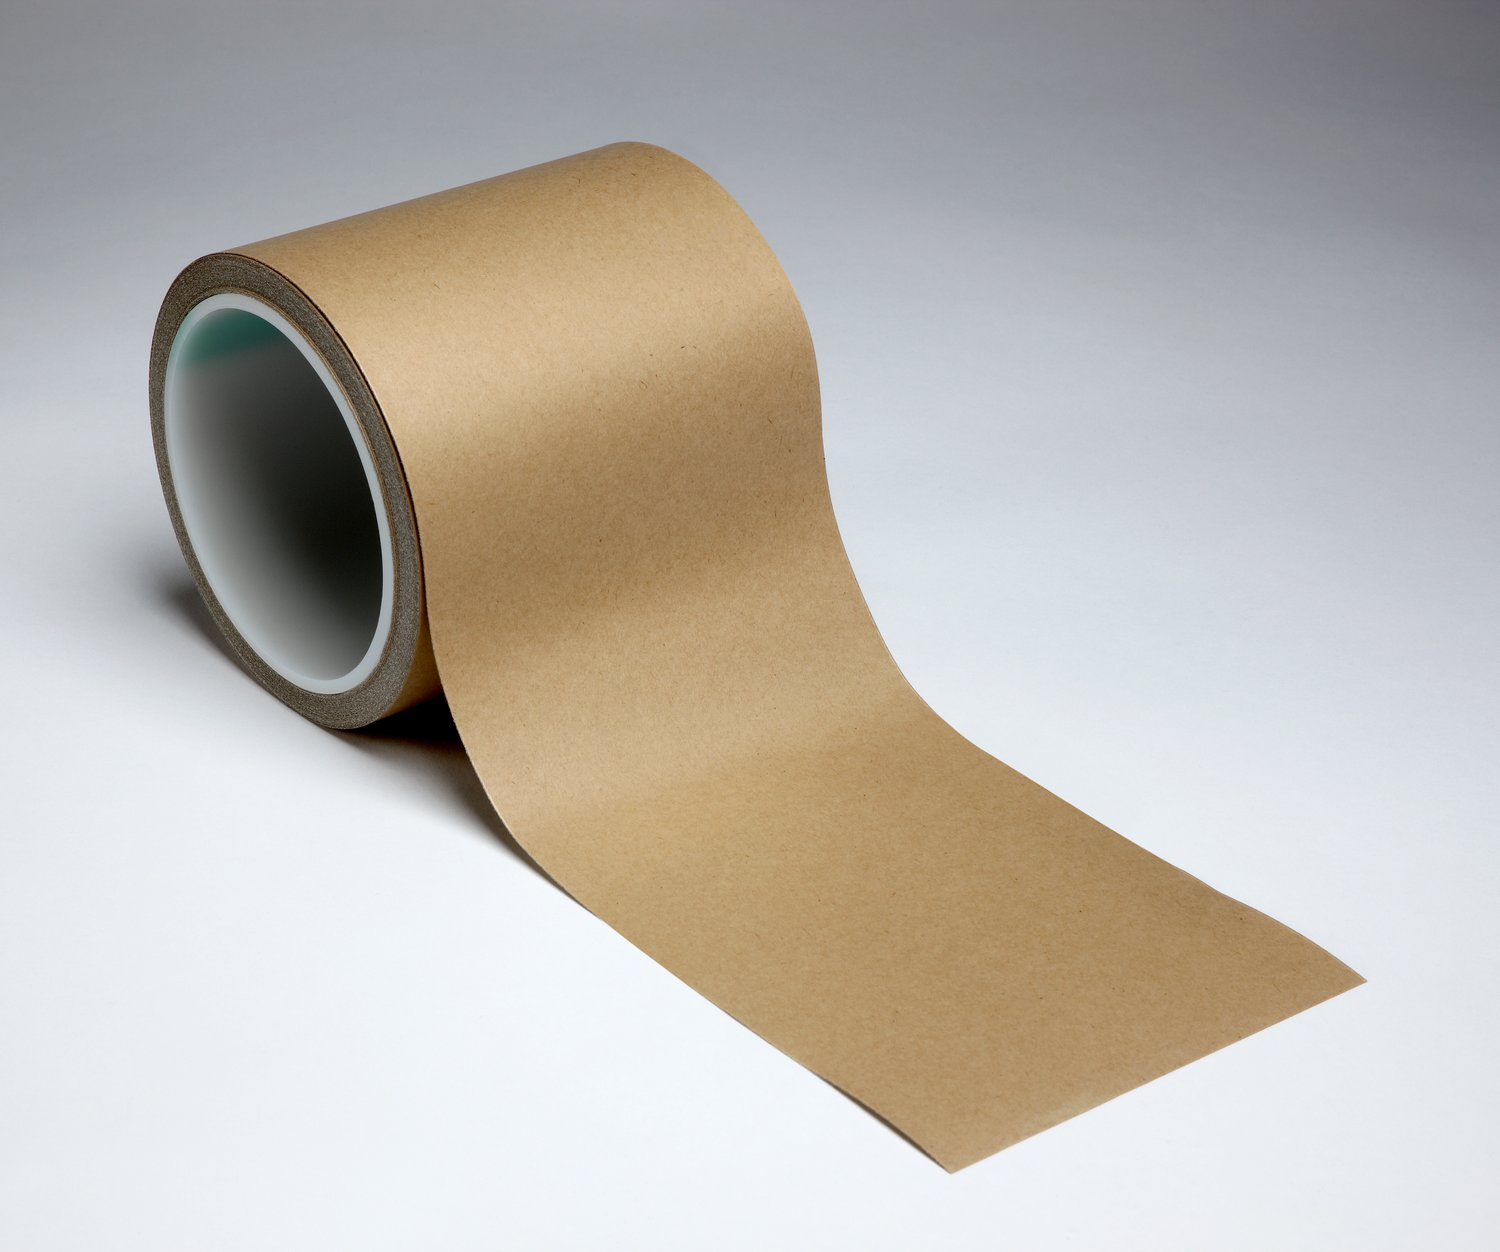 7000001335 - 3M Electrically Conductive Adhesive Transfer Tape 9709SL, 14 in x 108
yd, 1/Case, Bulk